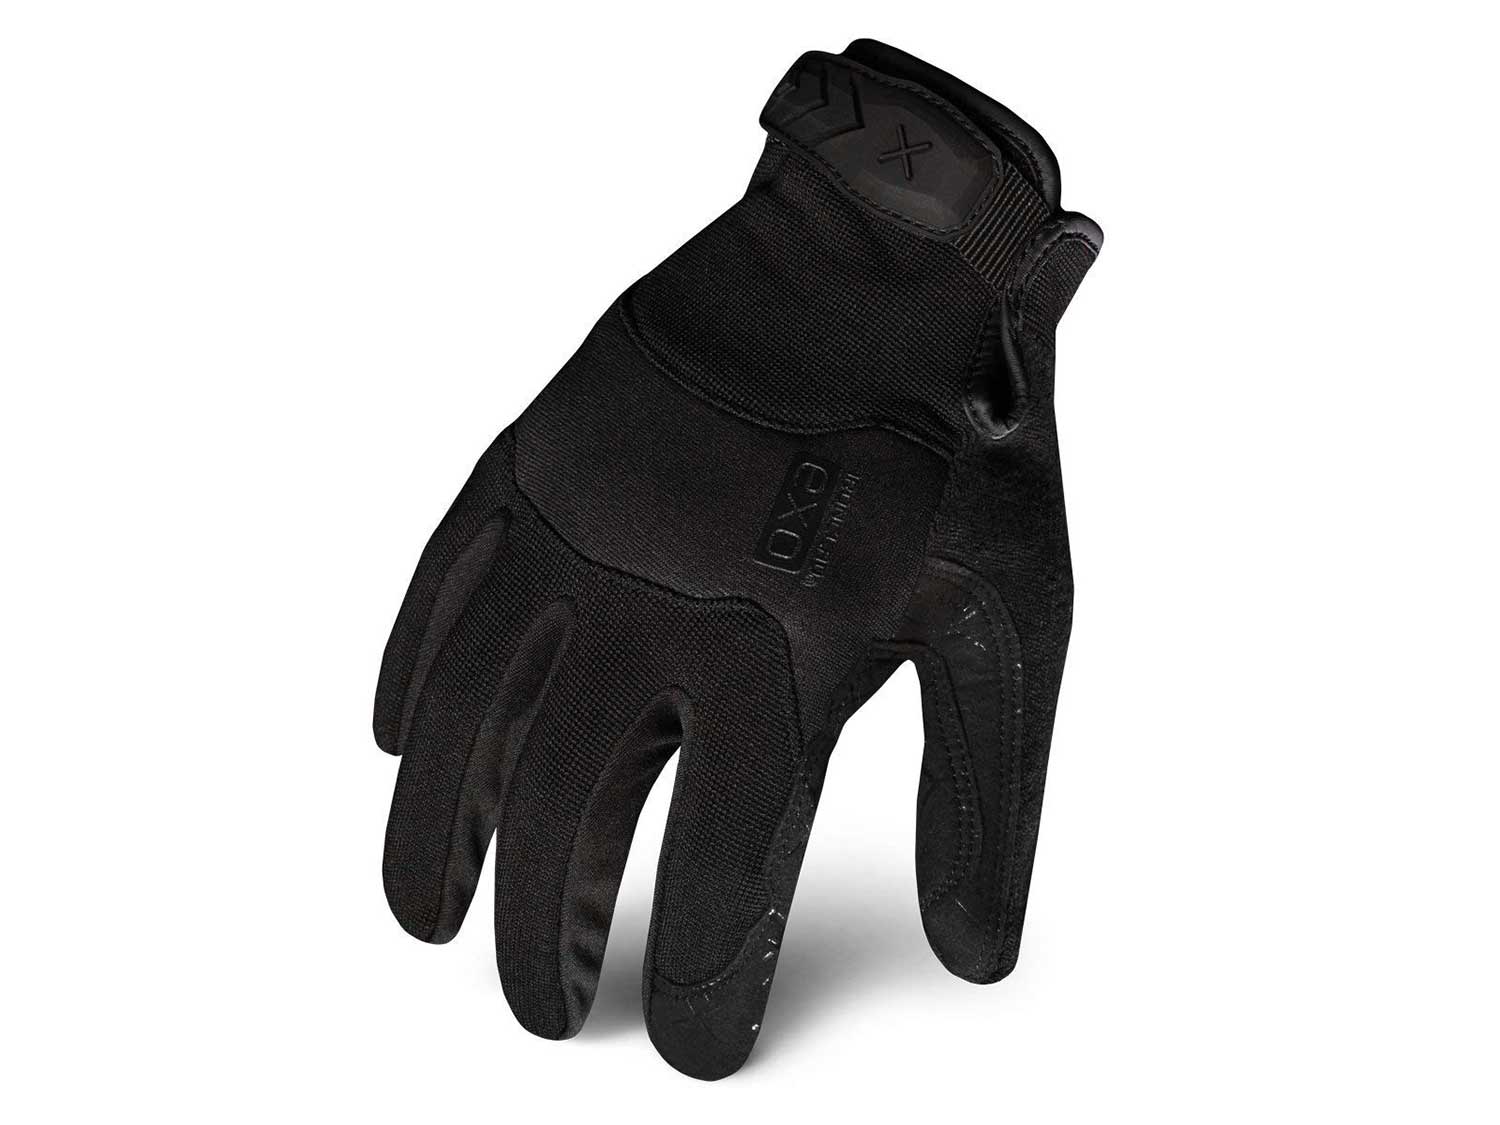 Ironclad Tactical Gloves